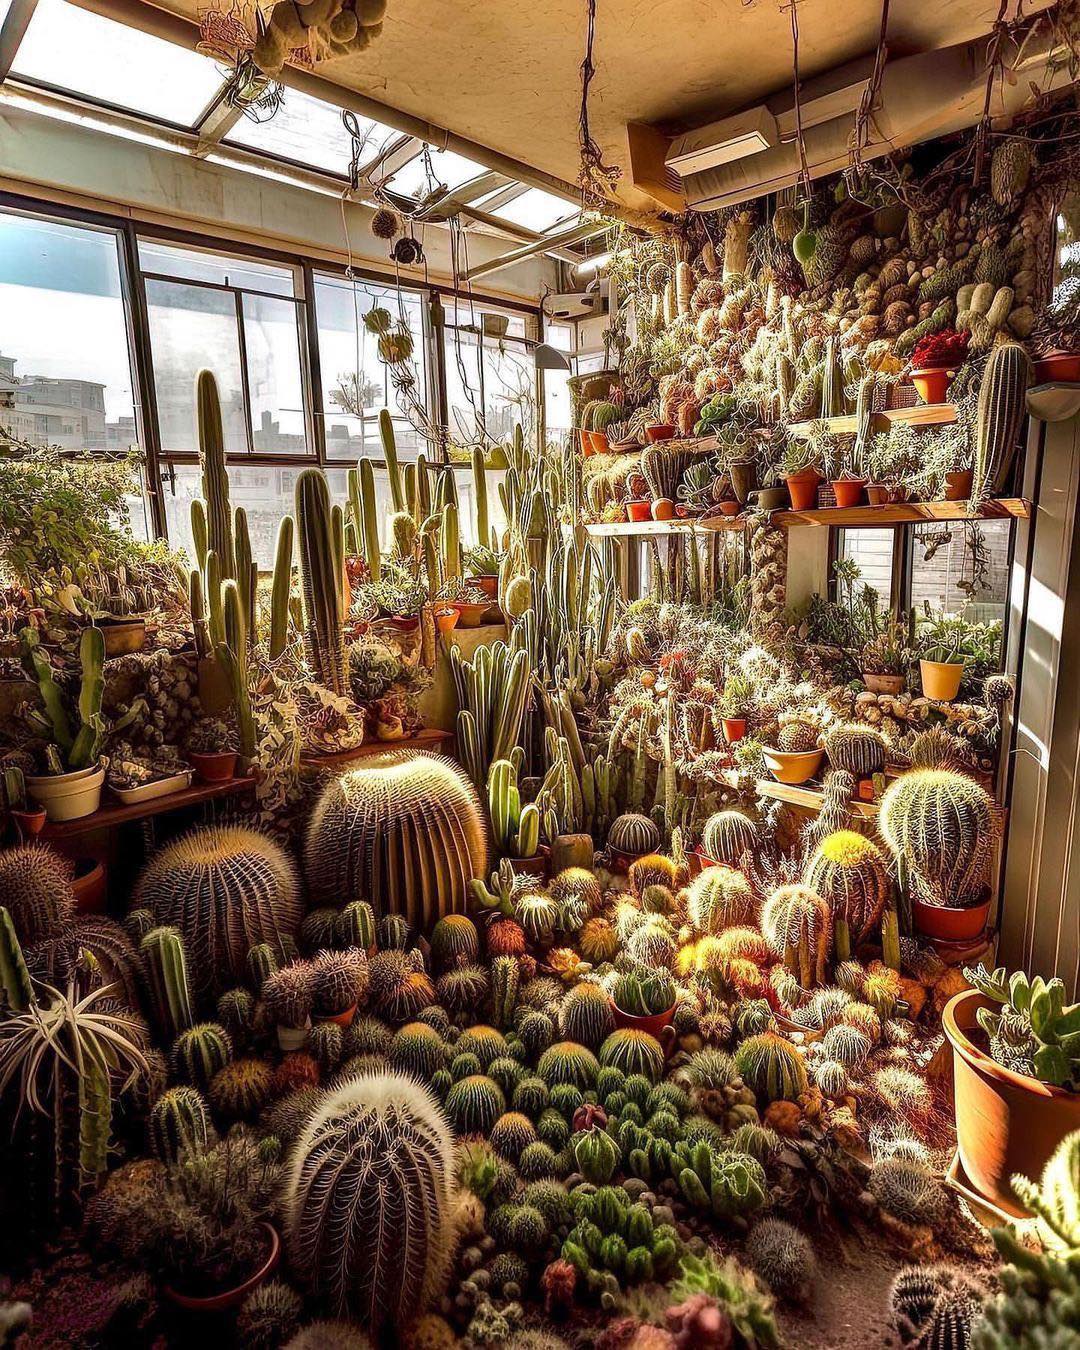 Discover the beautiful cactus house everyone dreams of – The Daily Worlds